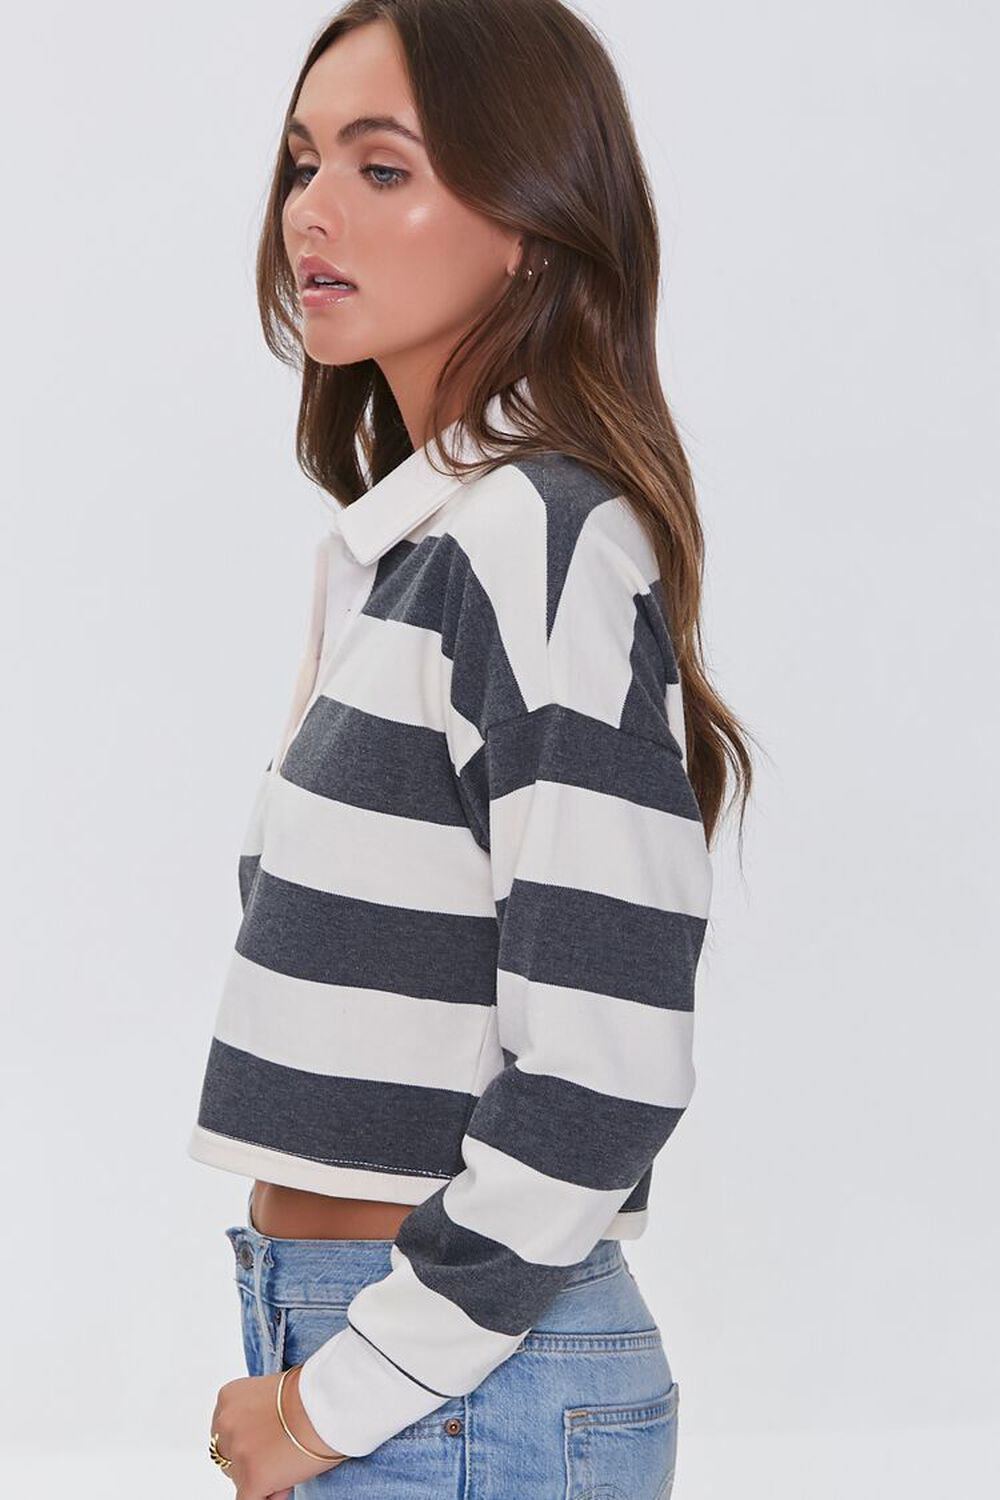 CHARCOAL/CREAM Striped Rugby Shirt, image 2